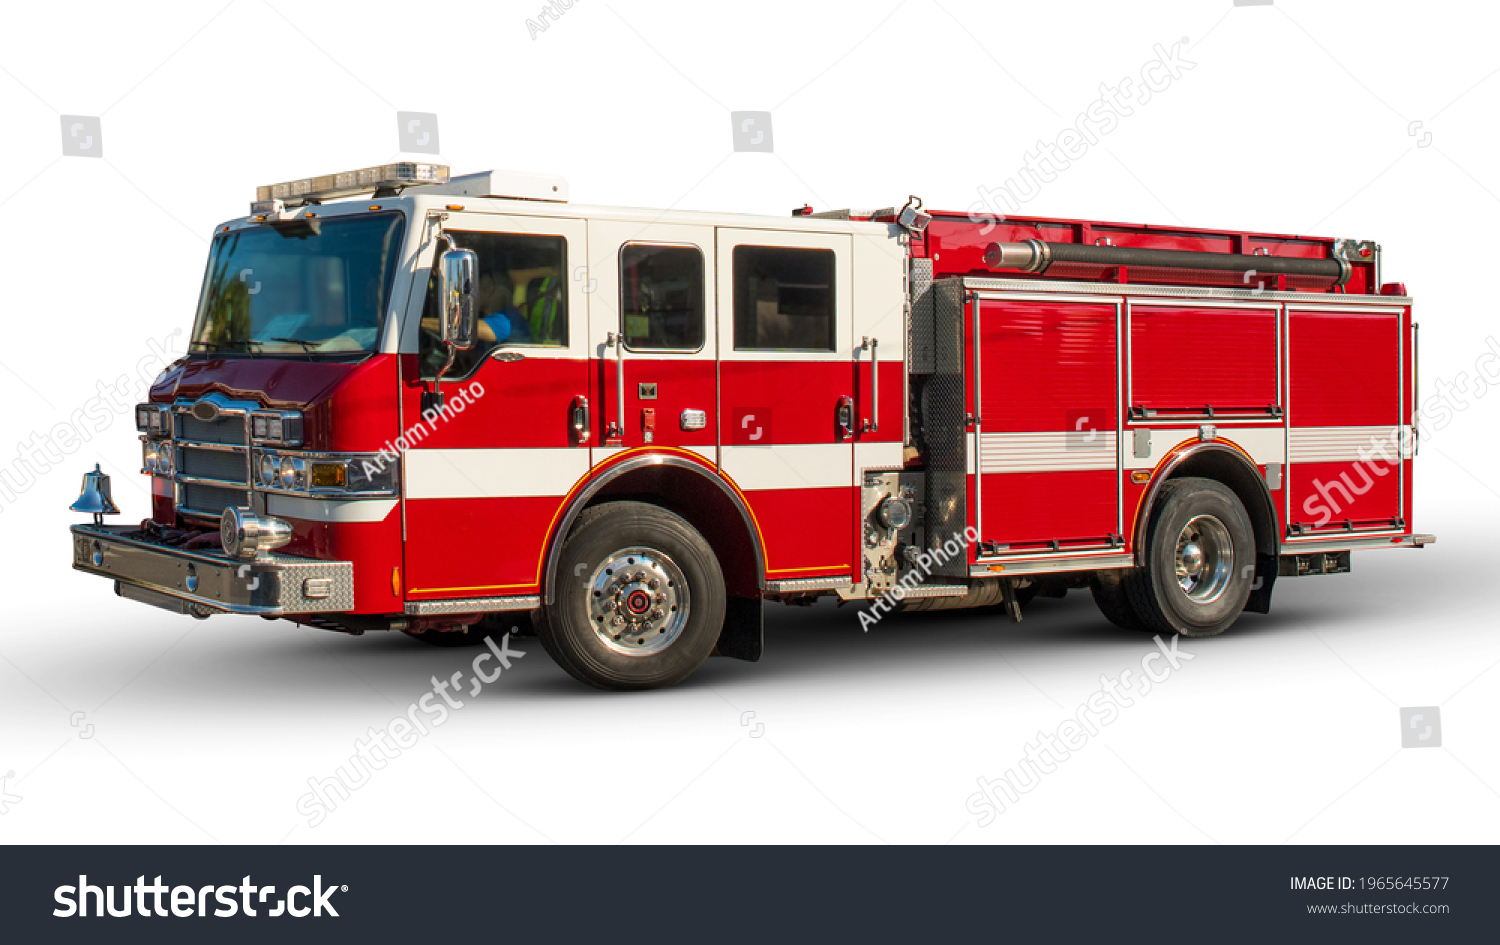 Firetruck or Red Fire engine. American fire truck on white isolated background. Emergency vehicle. Real full size car. American Rescue Service.  #1965645577